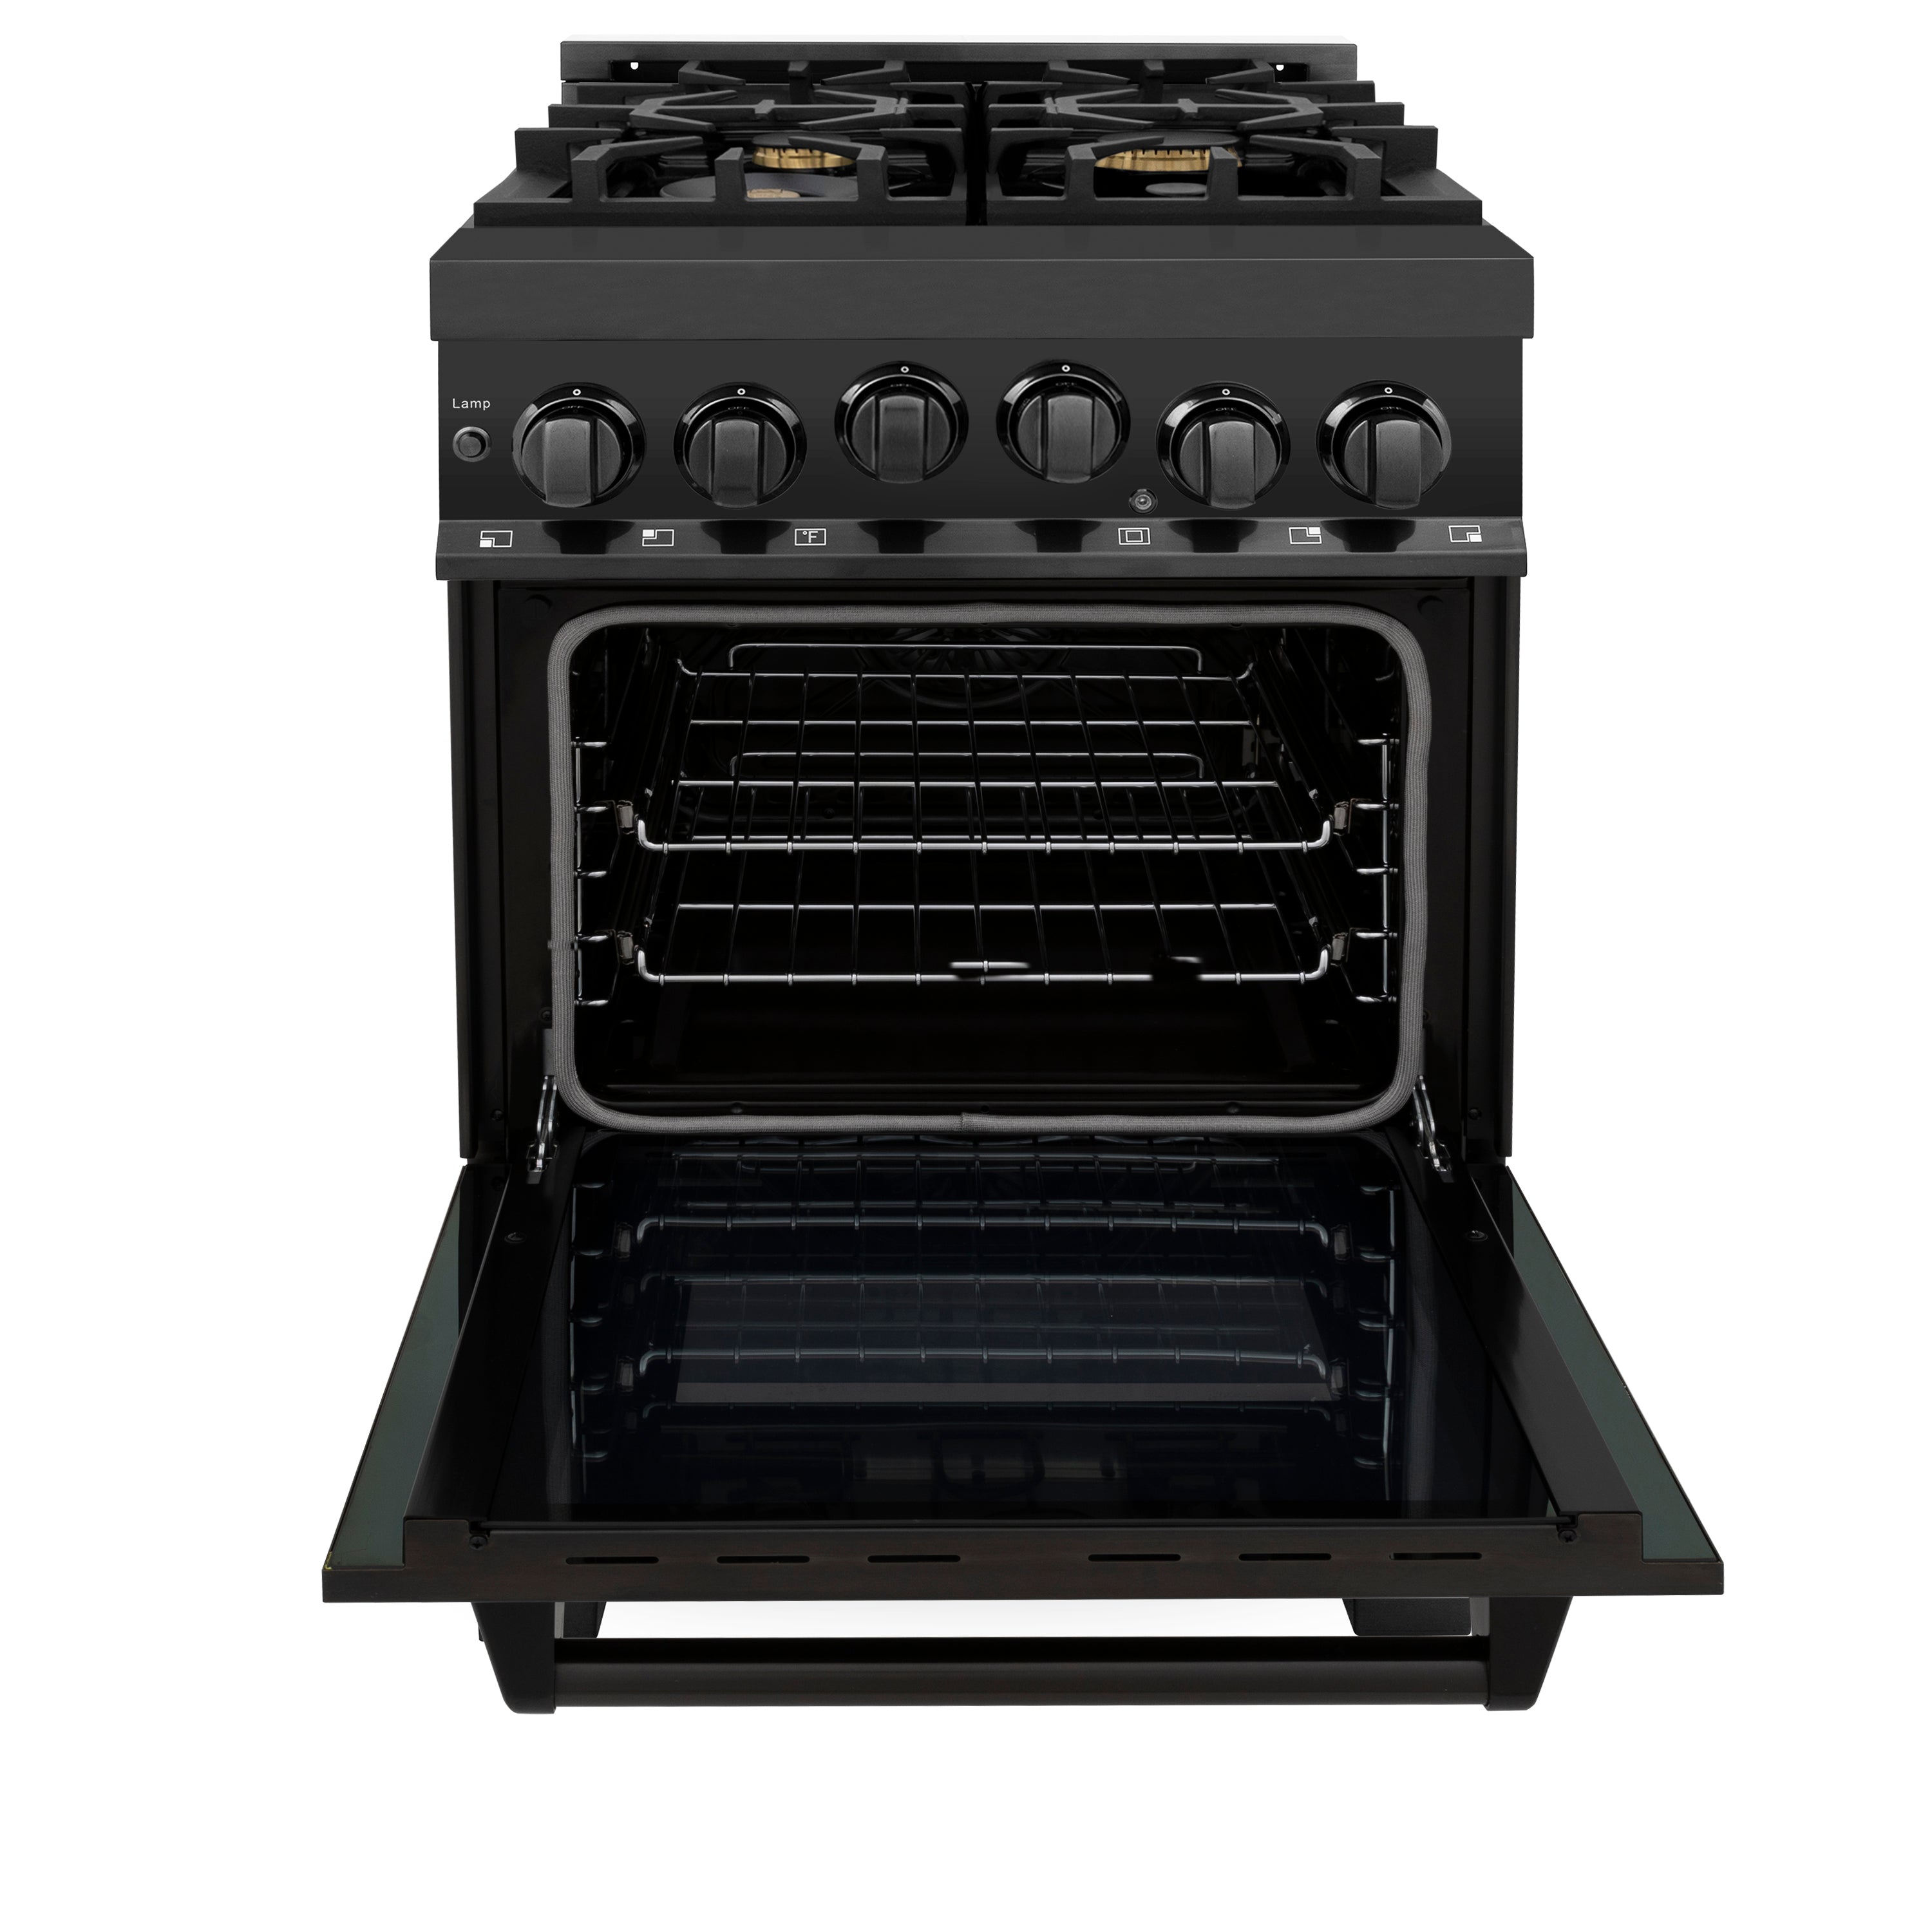 ZLINE 24" 2.8 cu. ft. Range with Gas Stove and Gas Oven in Black Stainless Steel (RGB-24)